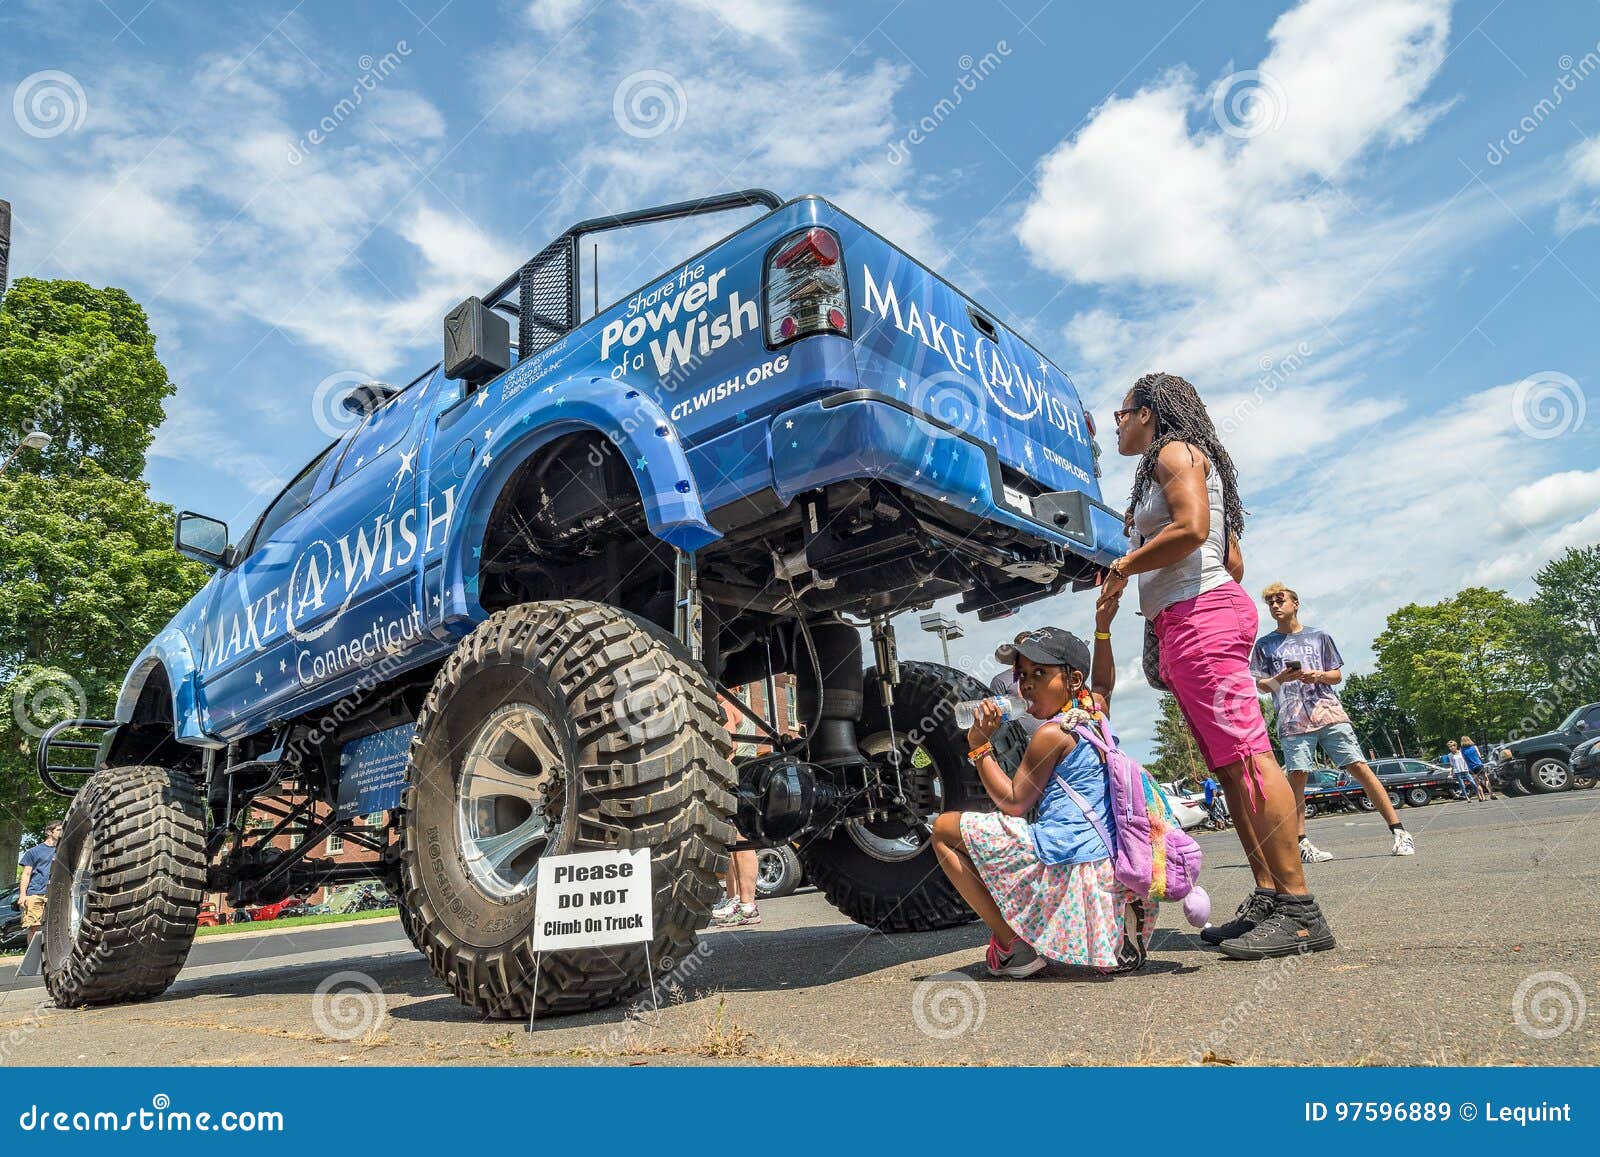 Pink Monster Truck Photos Free Royalty Free Stock Photos From Dreamstime